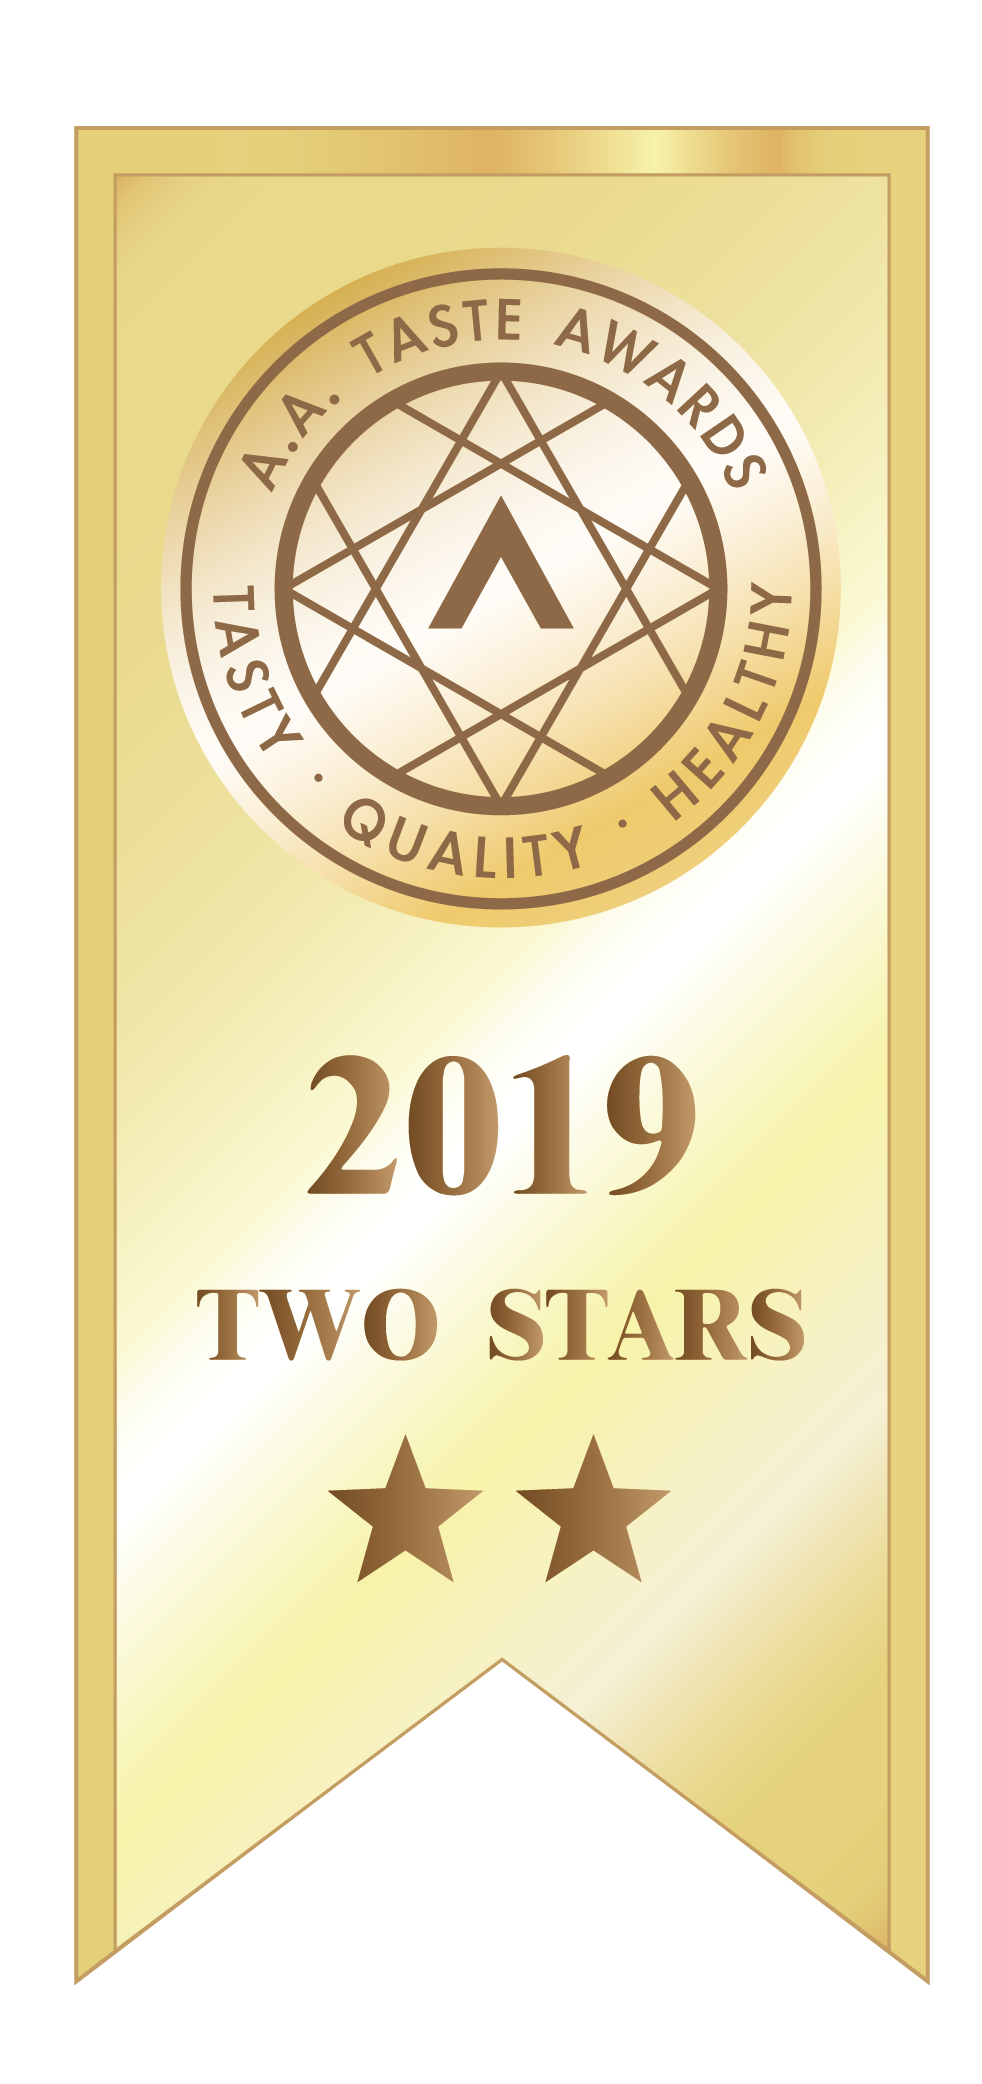 2019  A.A. Taste Awards(outline)_two stars.png